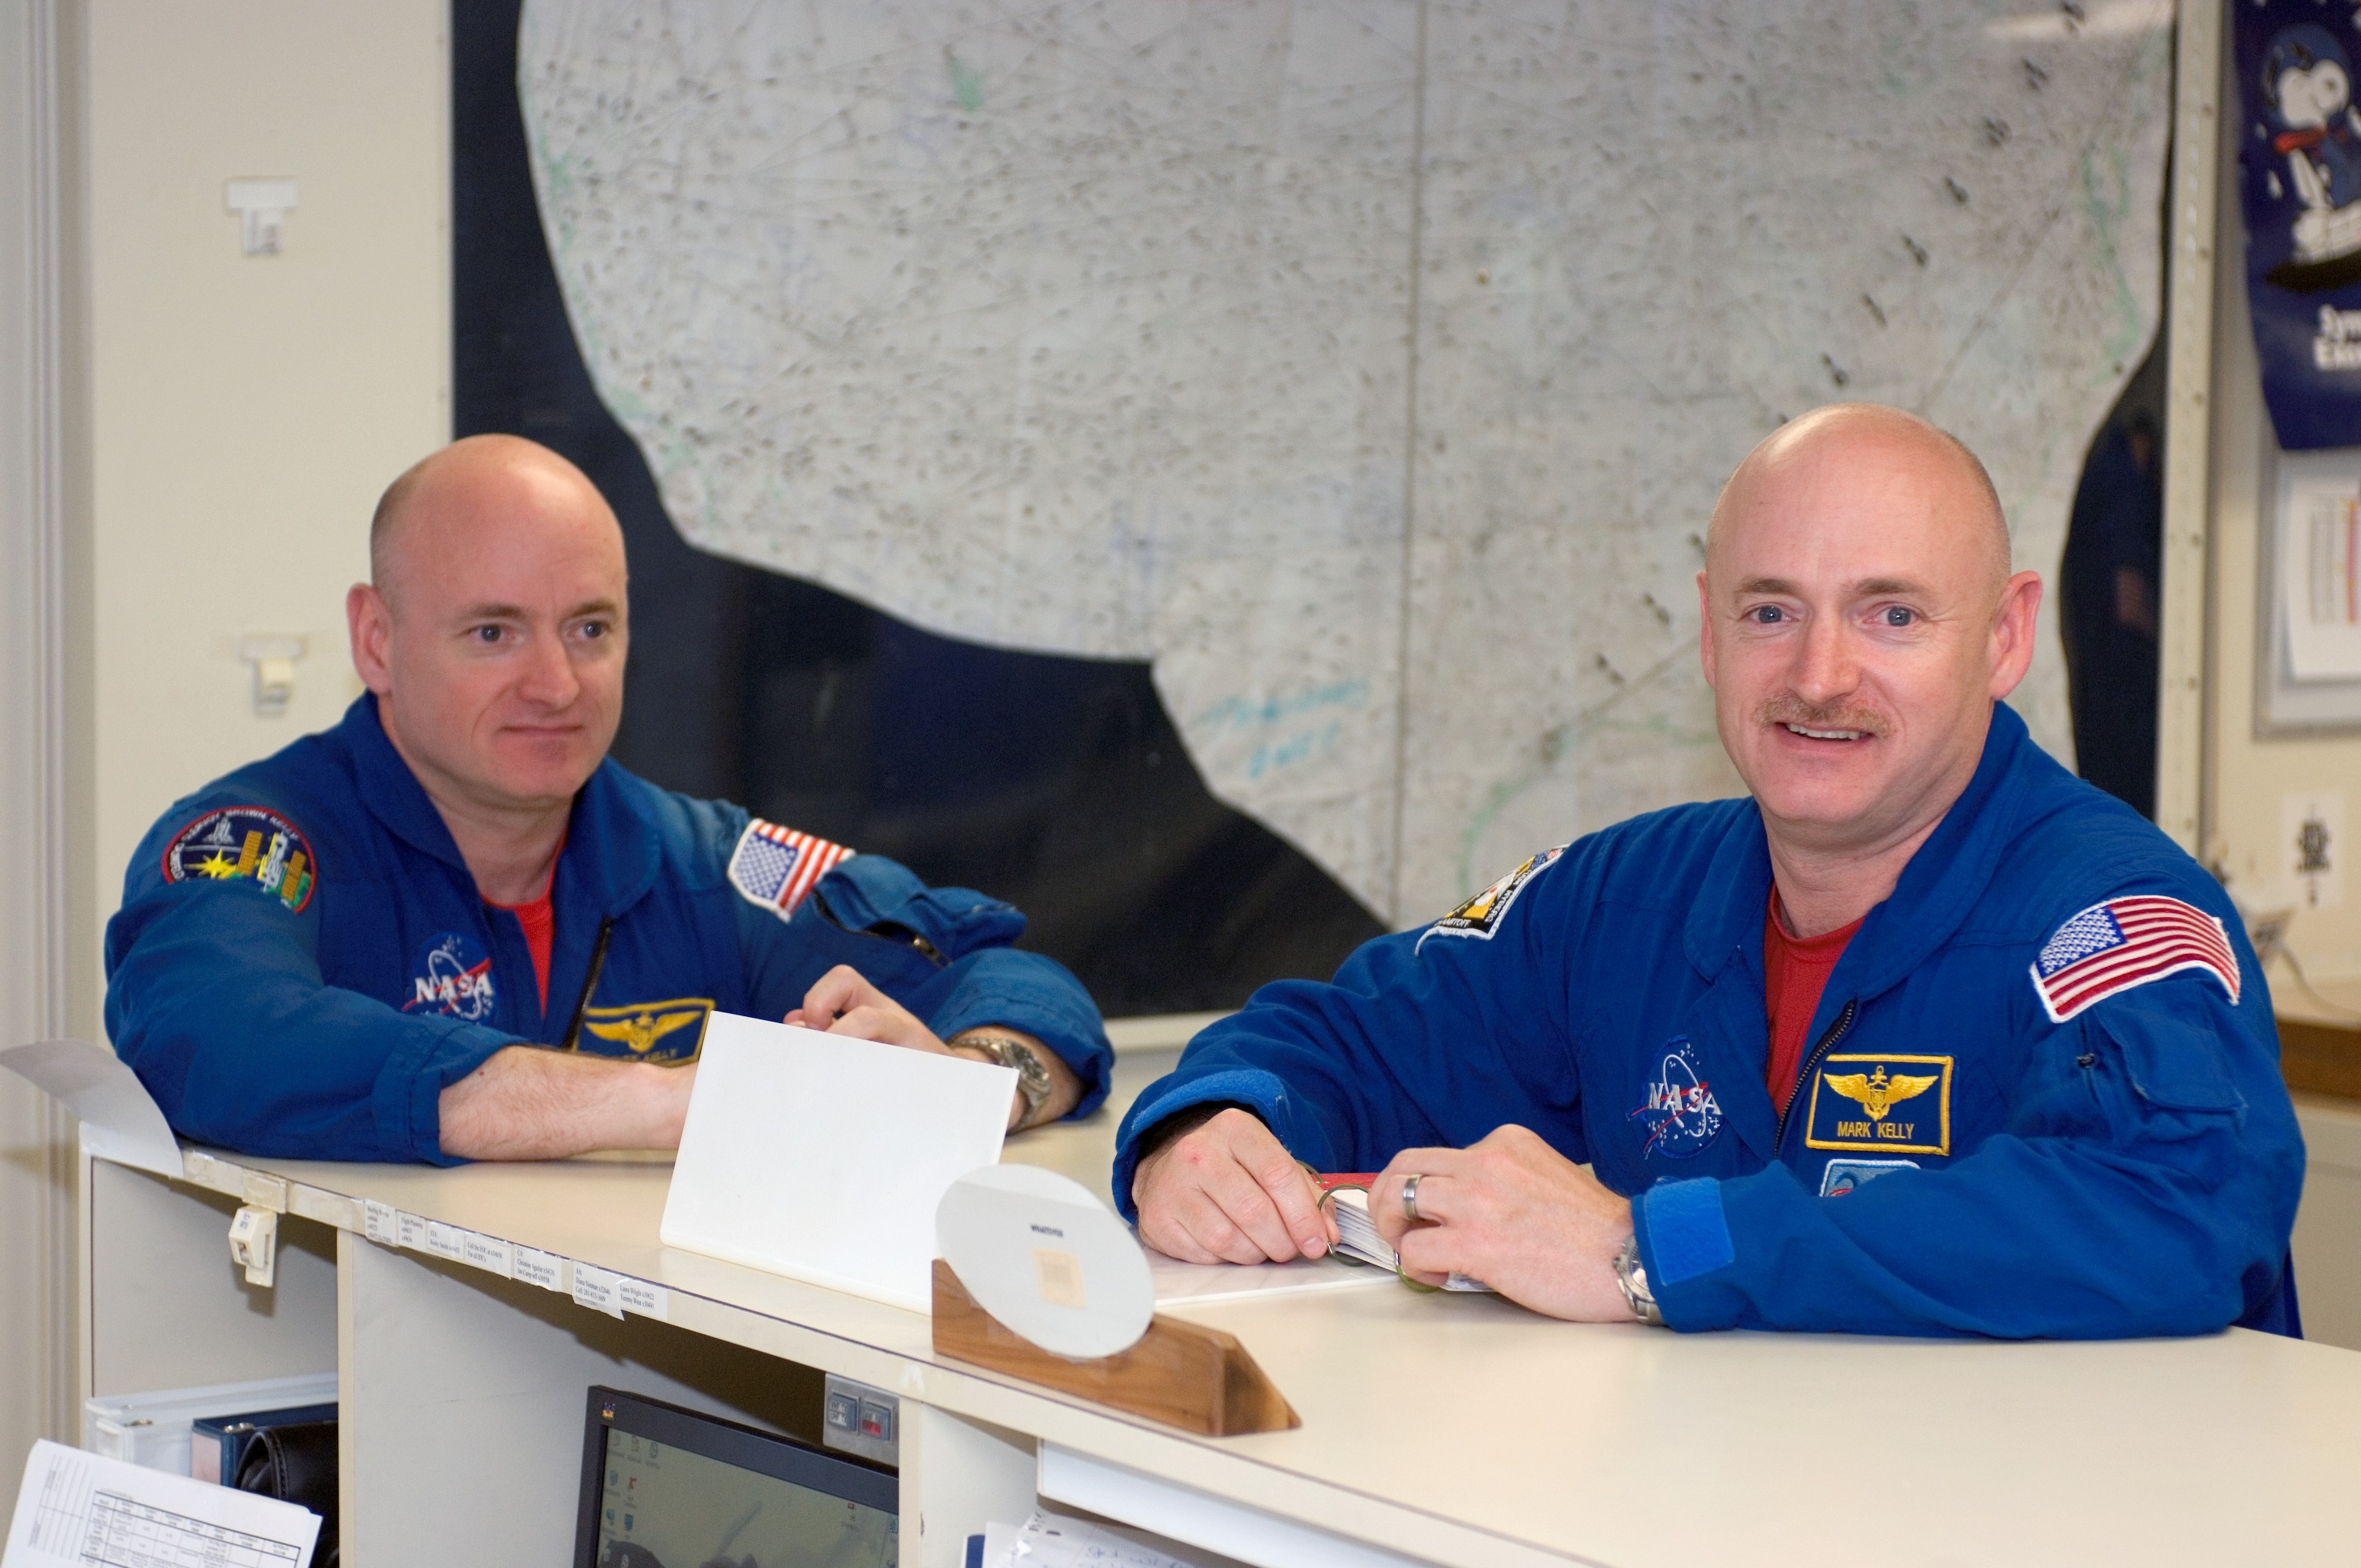 The Kelly brothers - Scott and Mark (left to right) - pose in May 2008. In 2015, both will be test subjects aiding researchers in the study of spaceflight's effects on the human body. Photo Credit: NASA